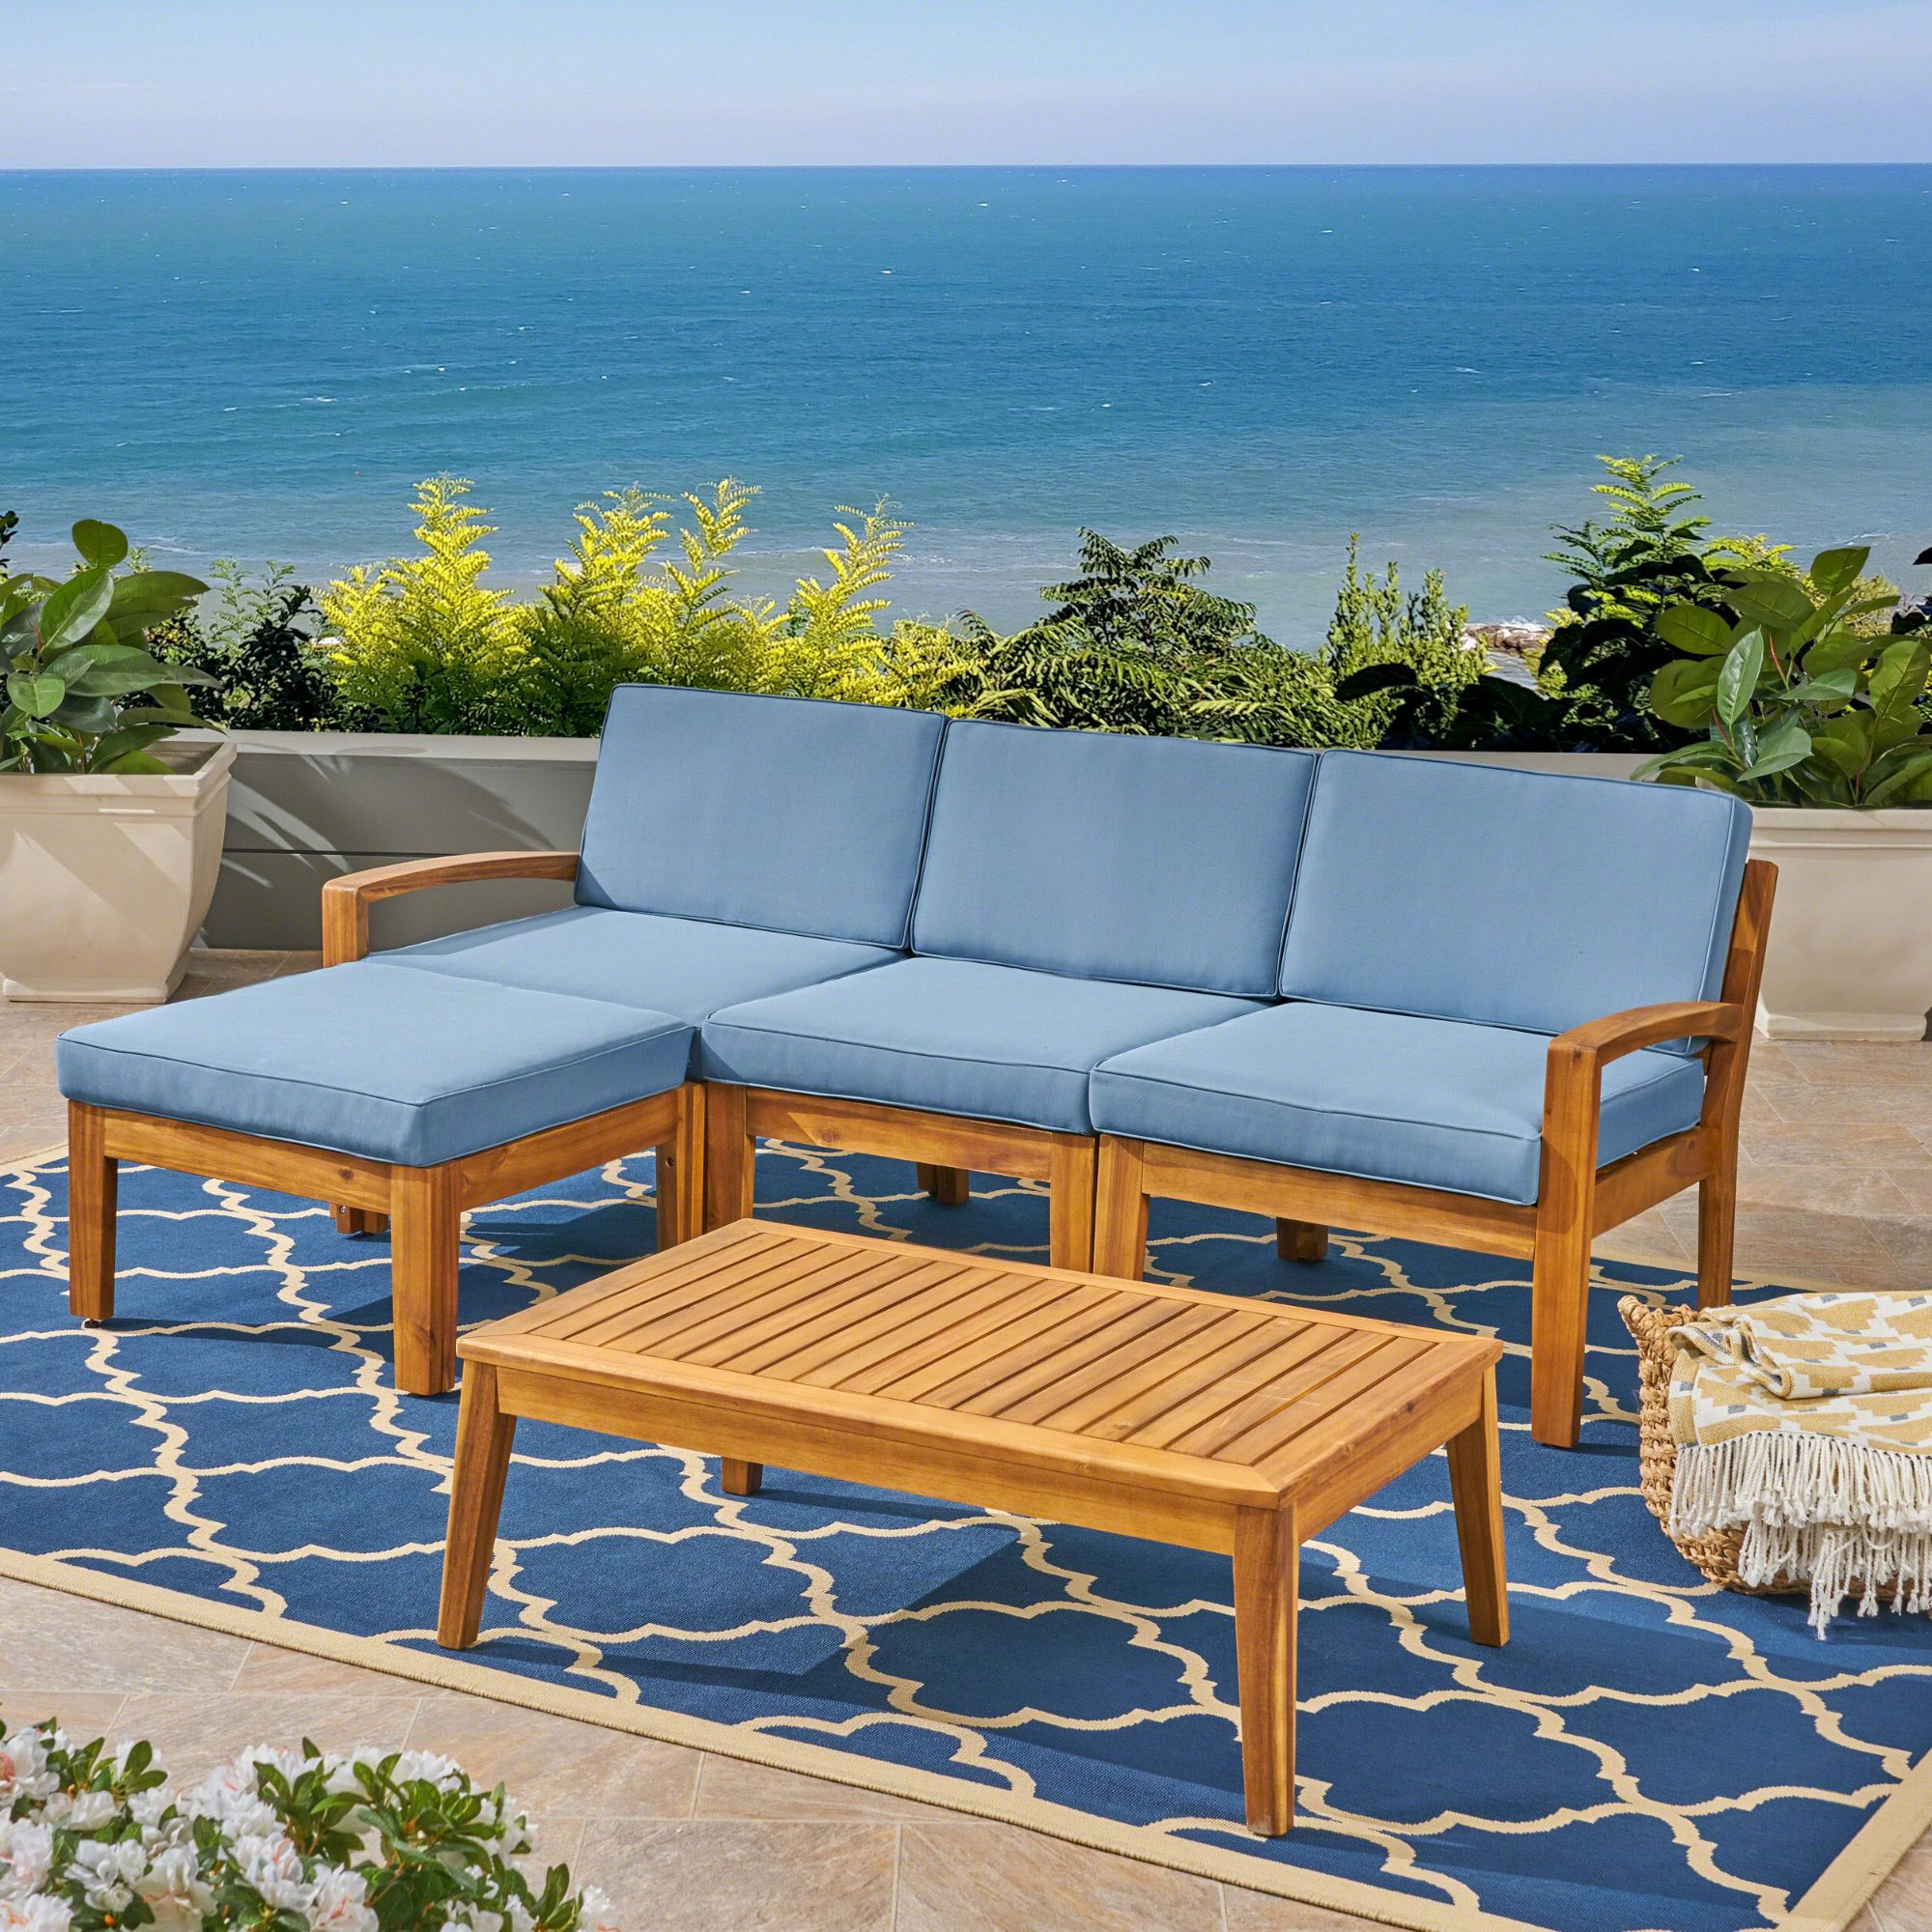 5pc Brown and Blue Outdoor Patio Conversation Set with Cushions 39.5" - image 2 of 7